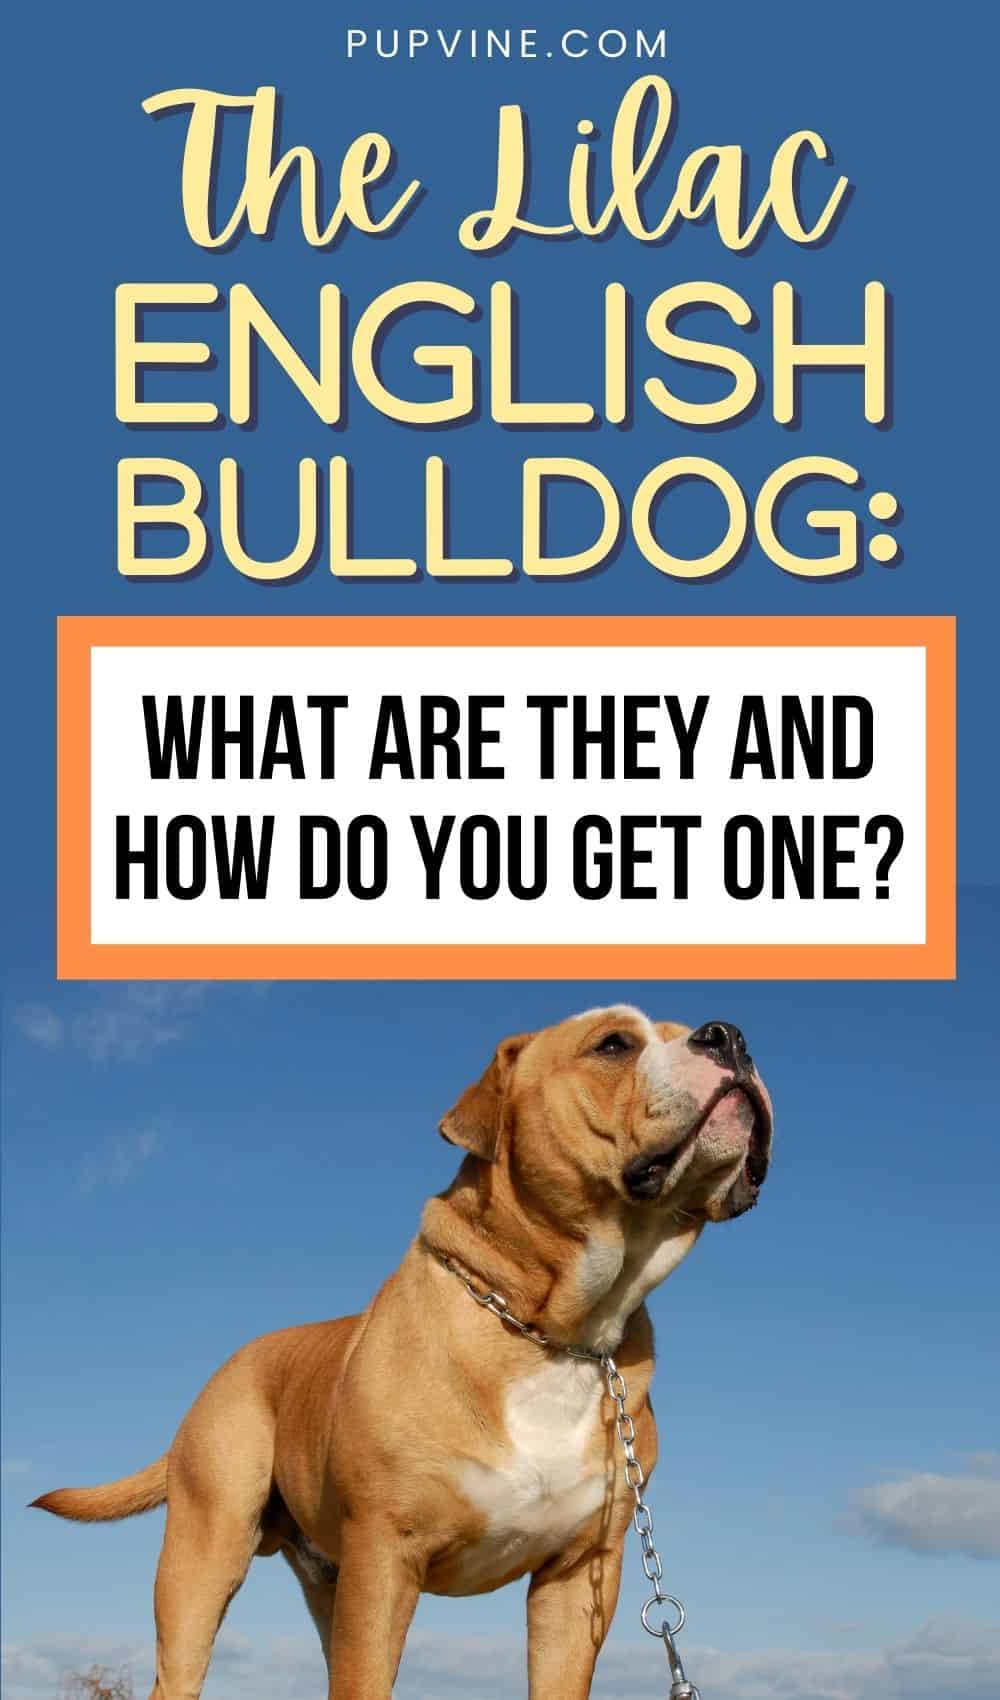 The Lilac English Bulldog What Are They And How Do You Get One